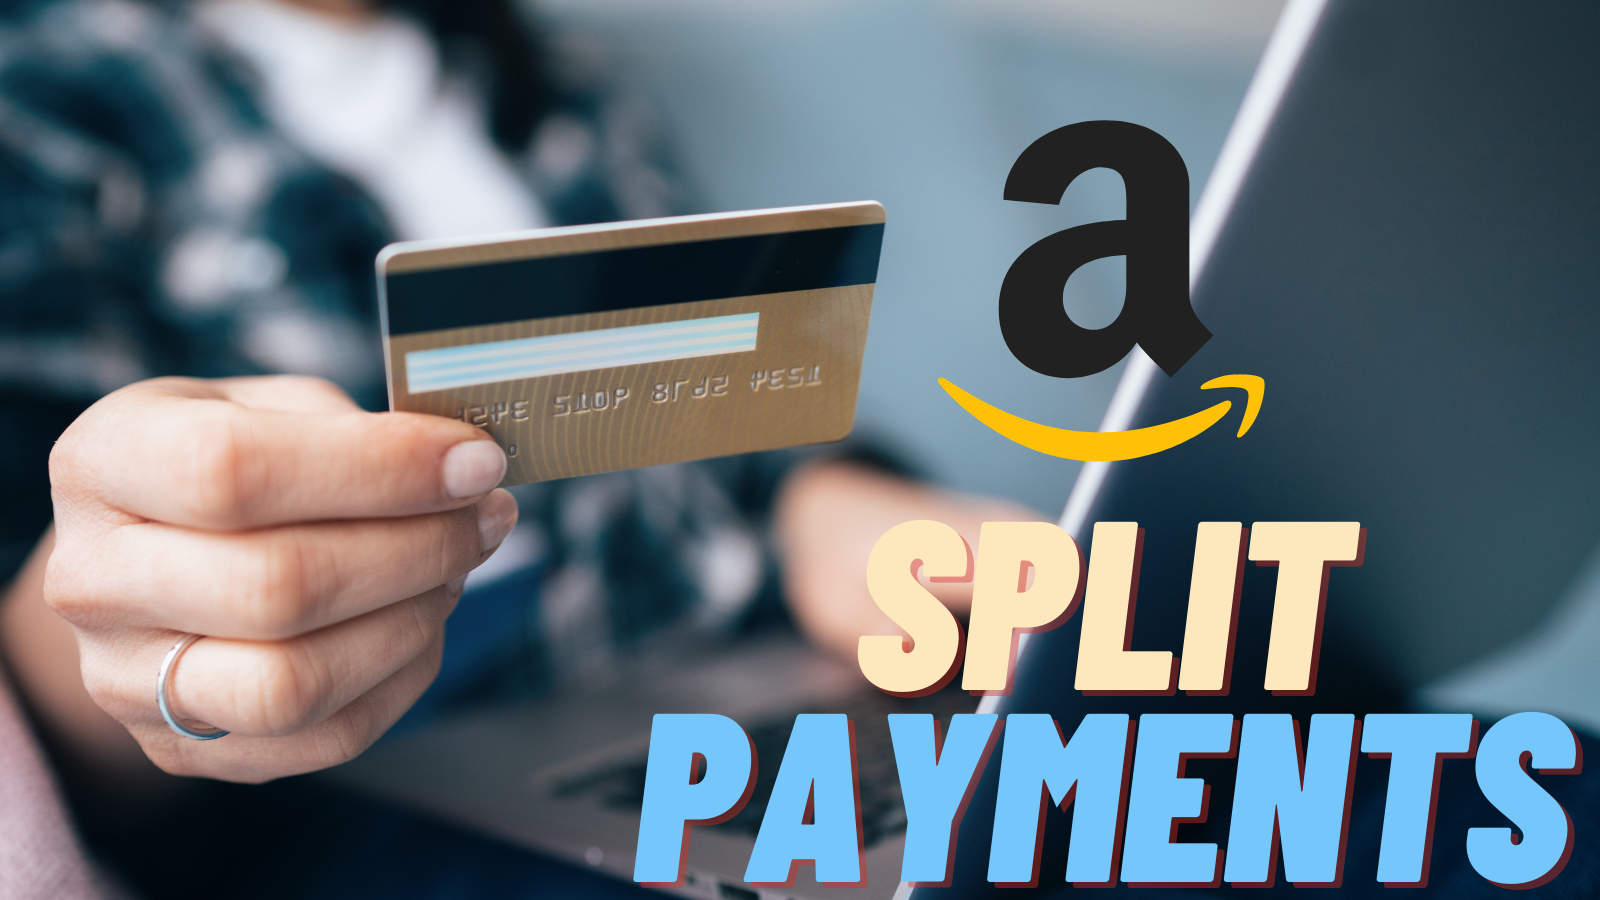 Can You Split Payments on Amazon in 2022? 